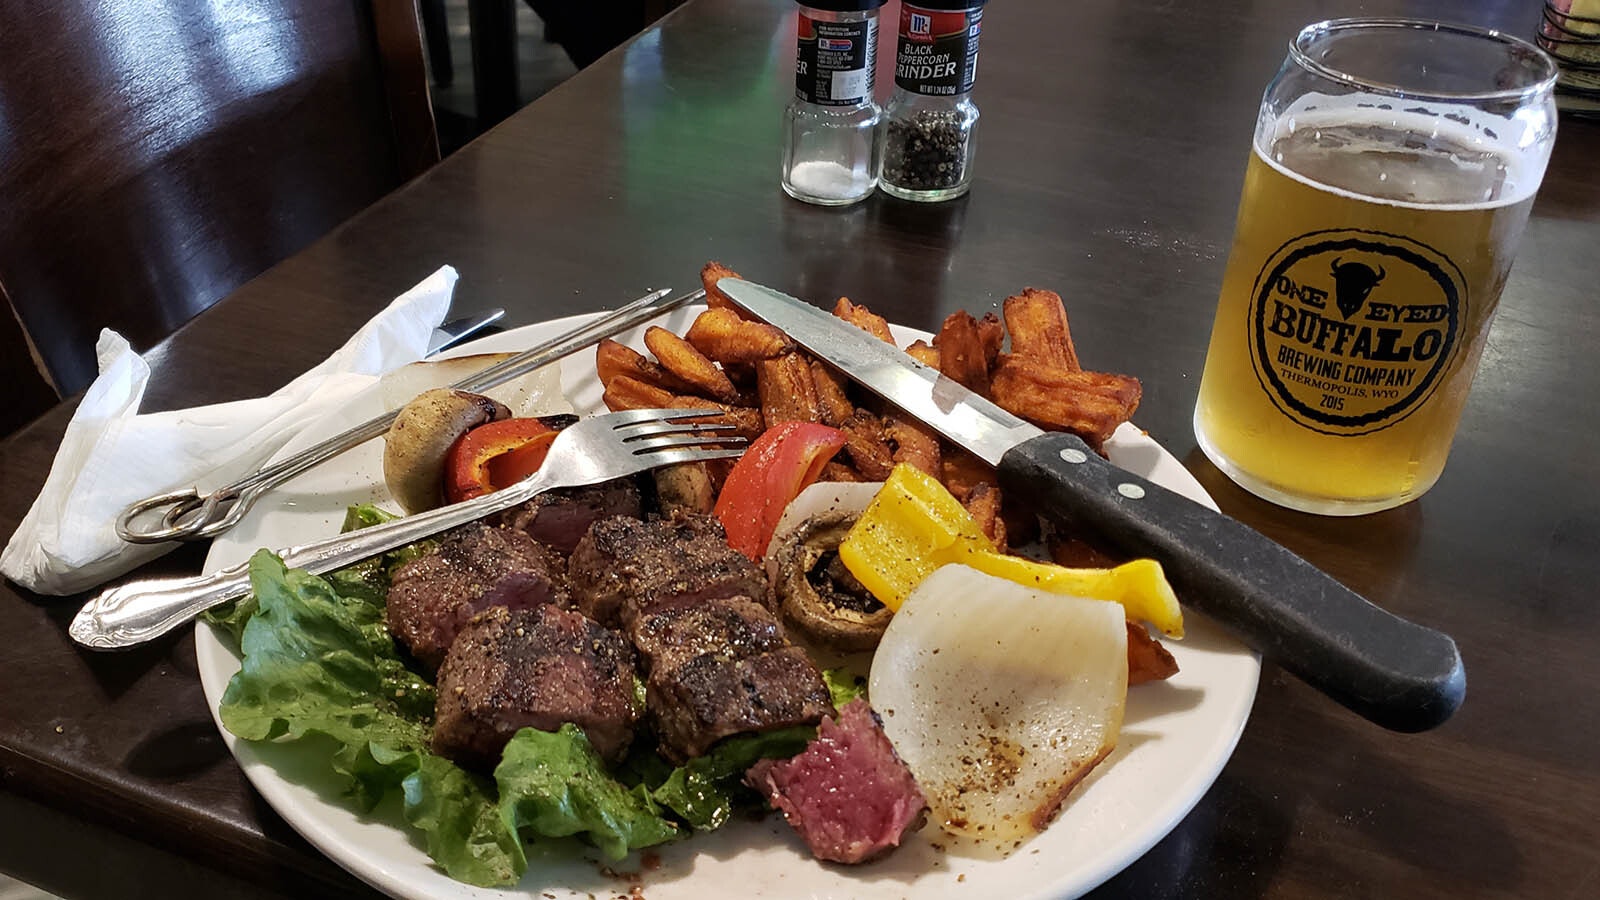 Doesn't get better than the steak kabobs with a craft brew.